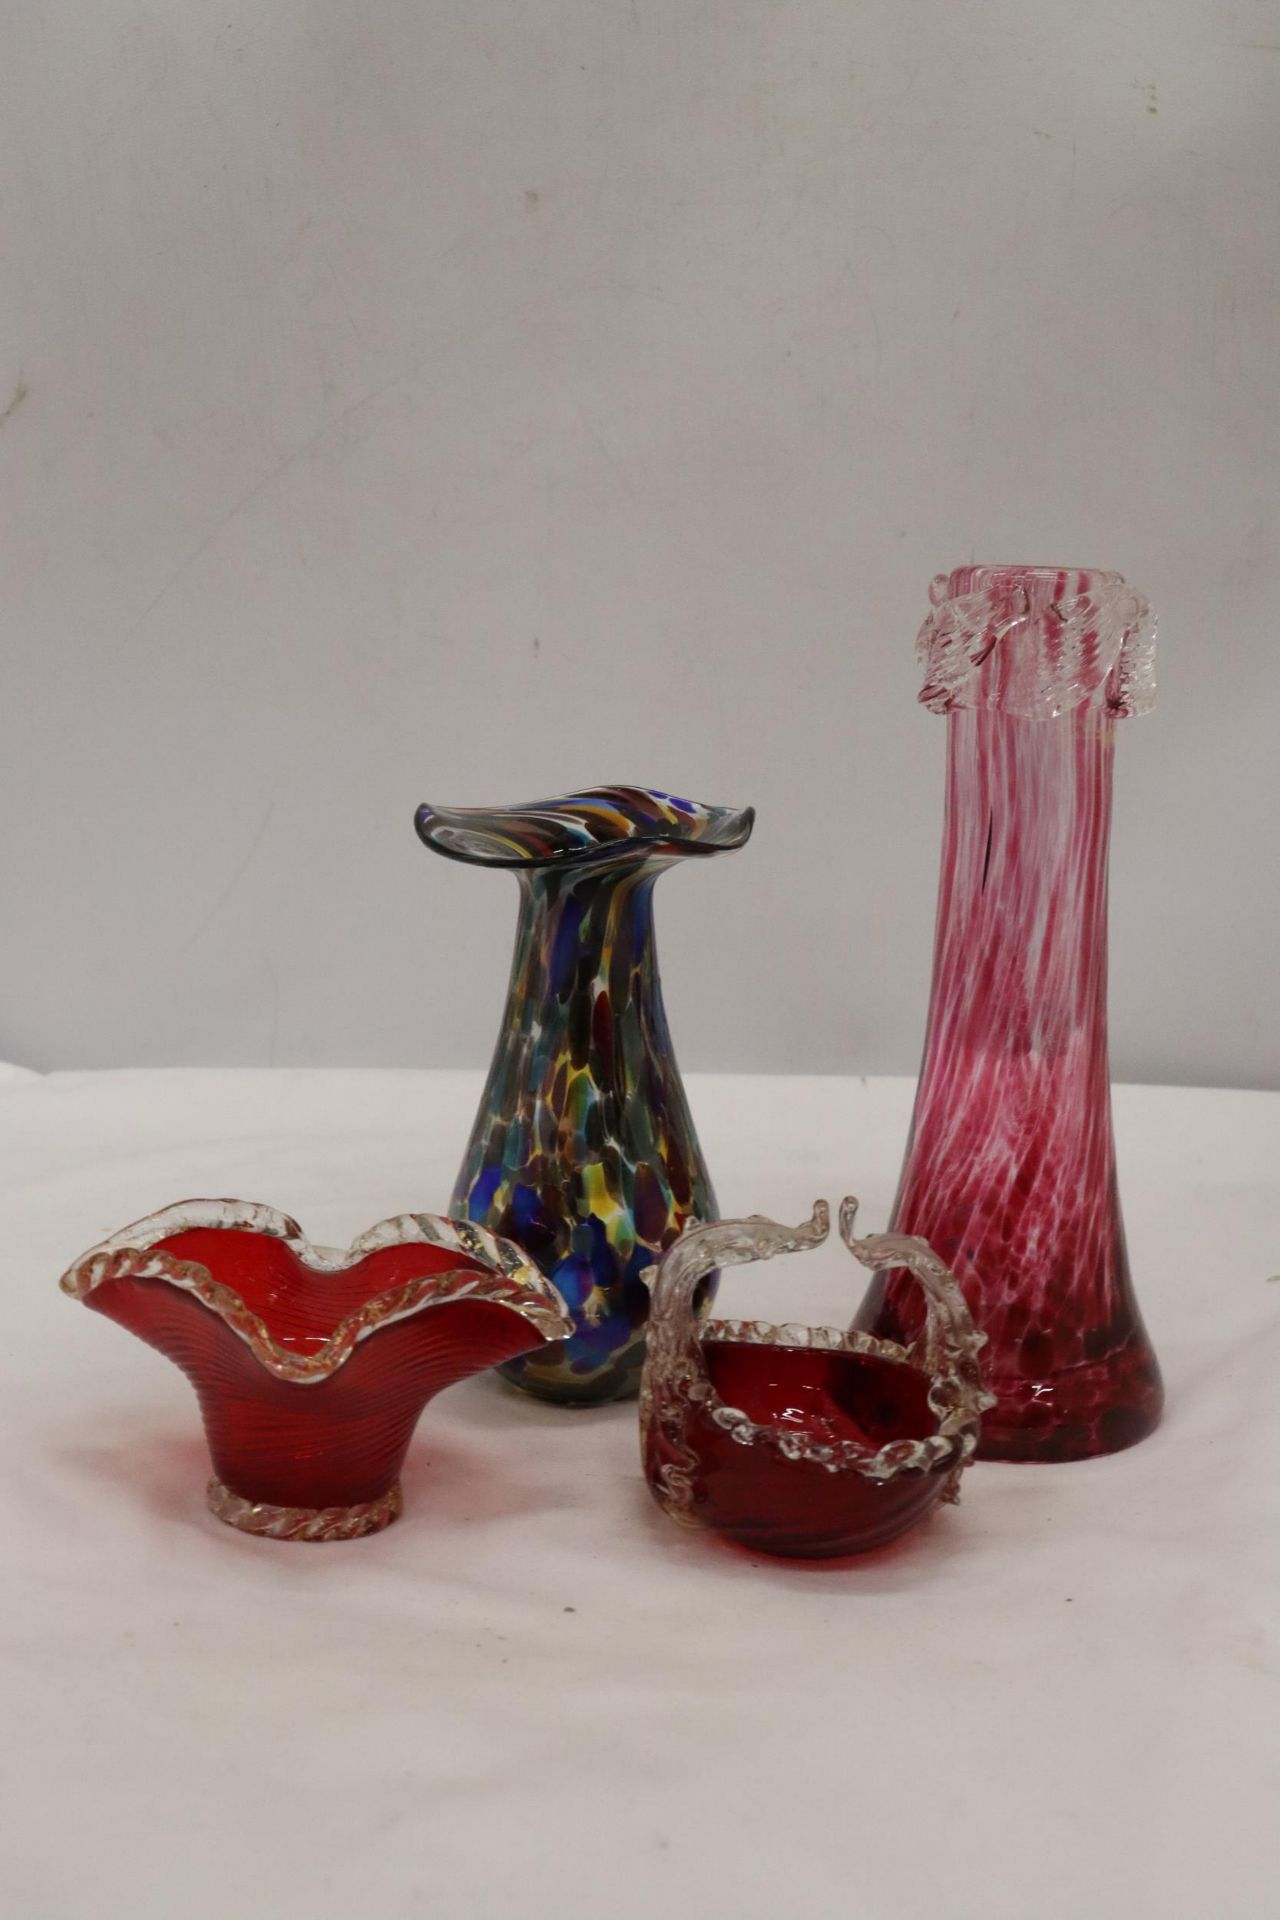 TWO PIECES OF VINTAGE CRANBERRY GLASS BOWLS PLUS TWO ART GLASS VASES